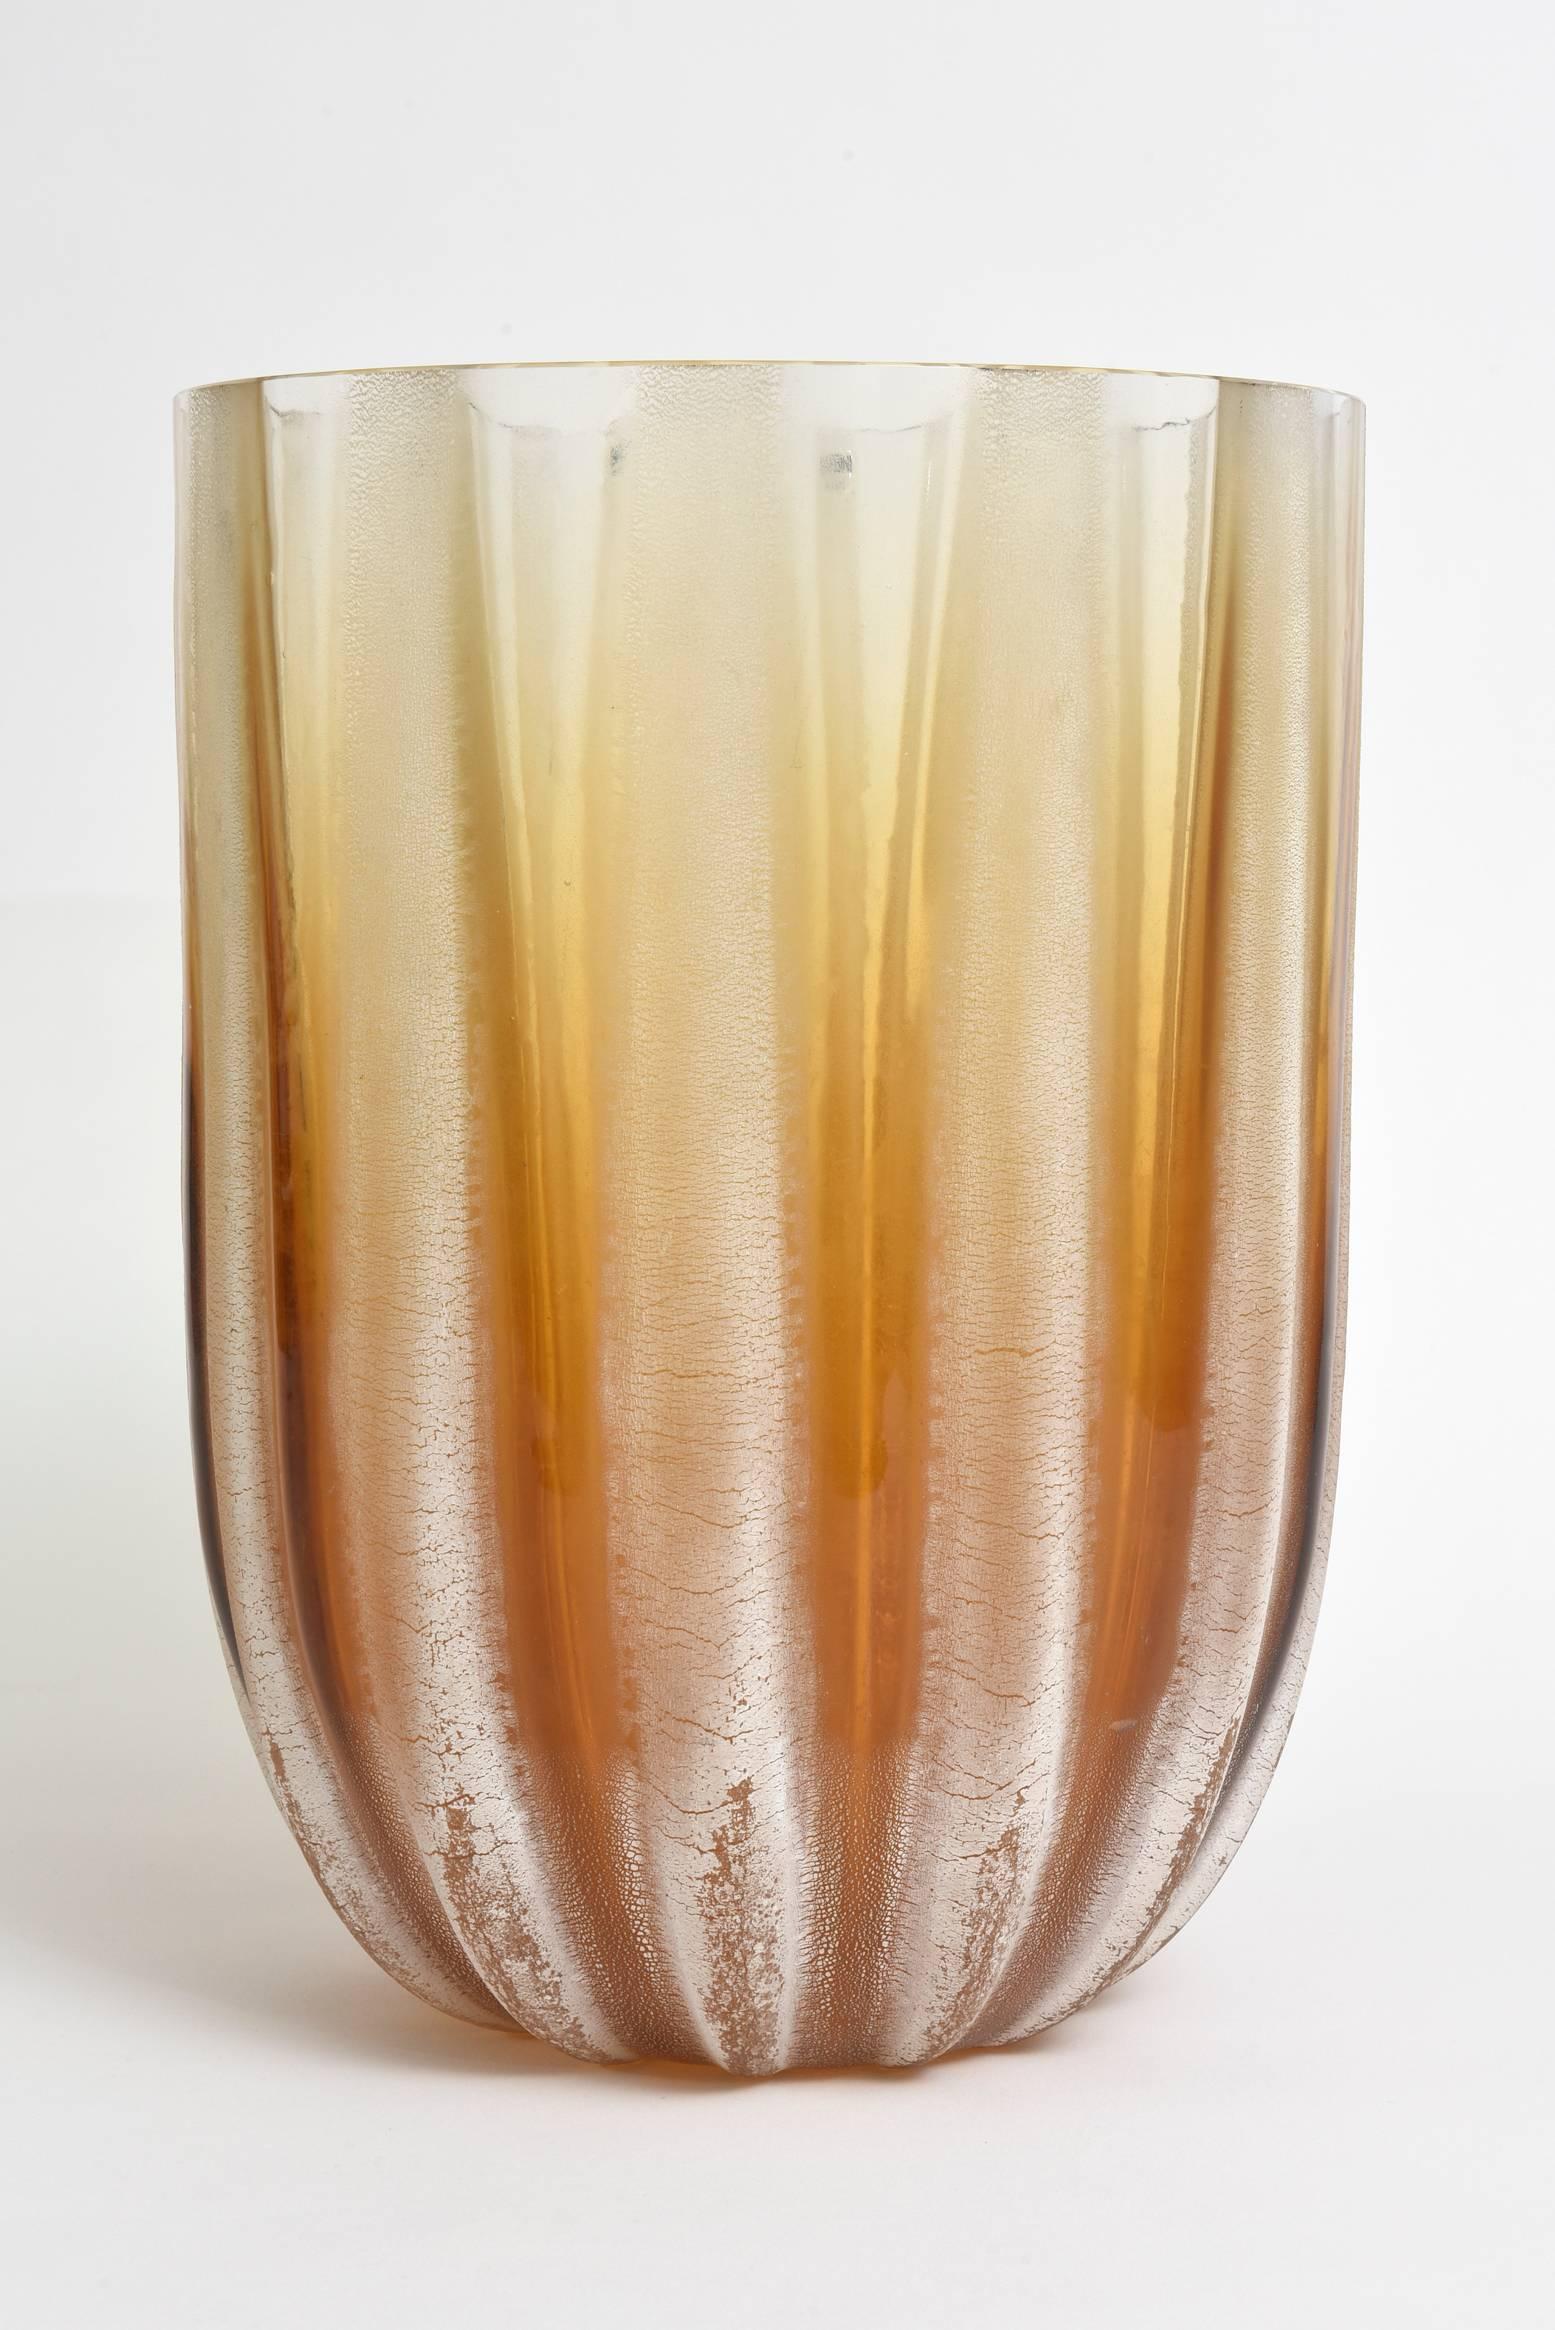 This stunning and monumental textural Italian Murano Barbini acid etched glass vase is a real beauty. The alternating stripes of amber and off-white in acid etched technique offer dimension and texture.
The original Barbini plastic label is on